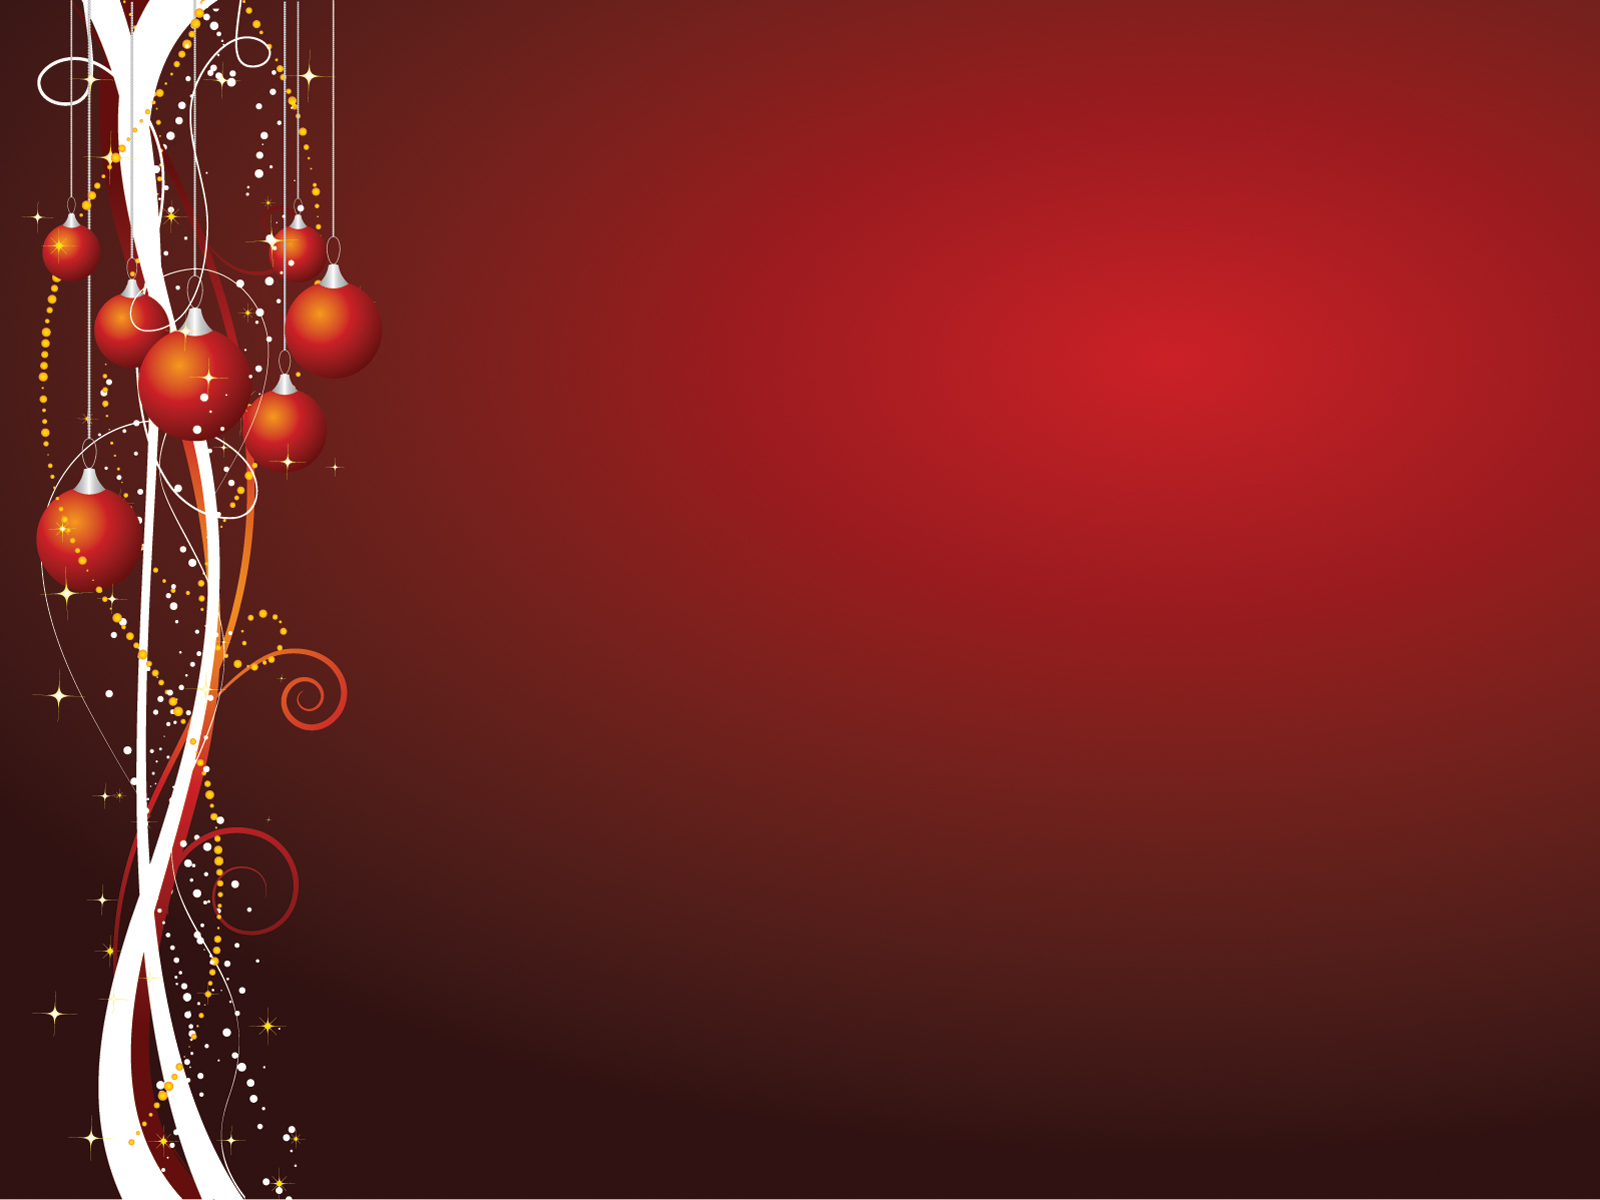 Christmas Ppt Design Ppt Background Ppt Backgrounds Templates Gambaran